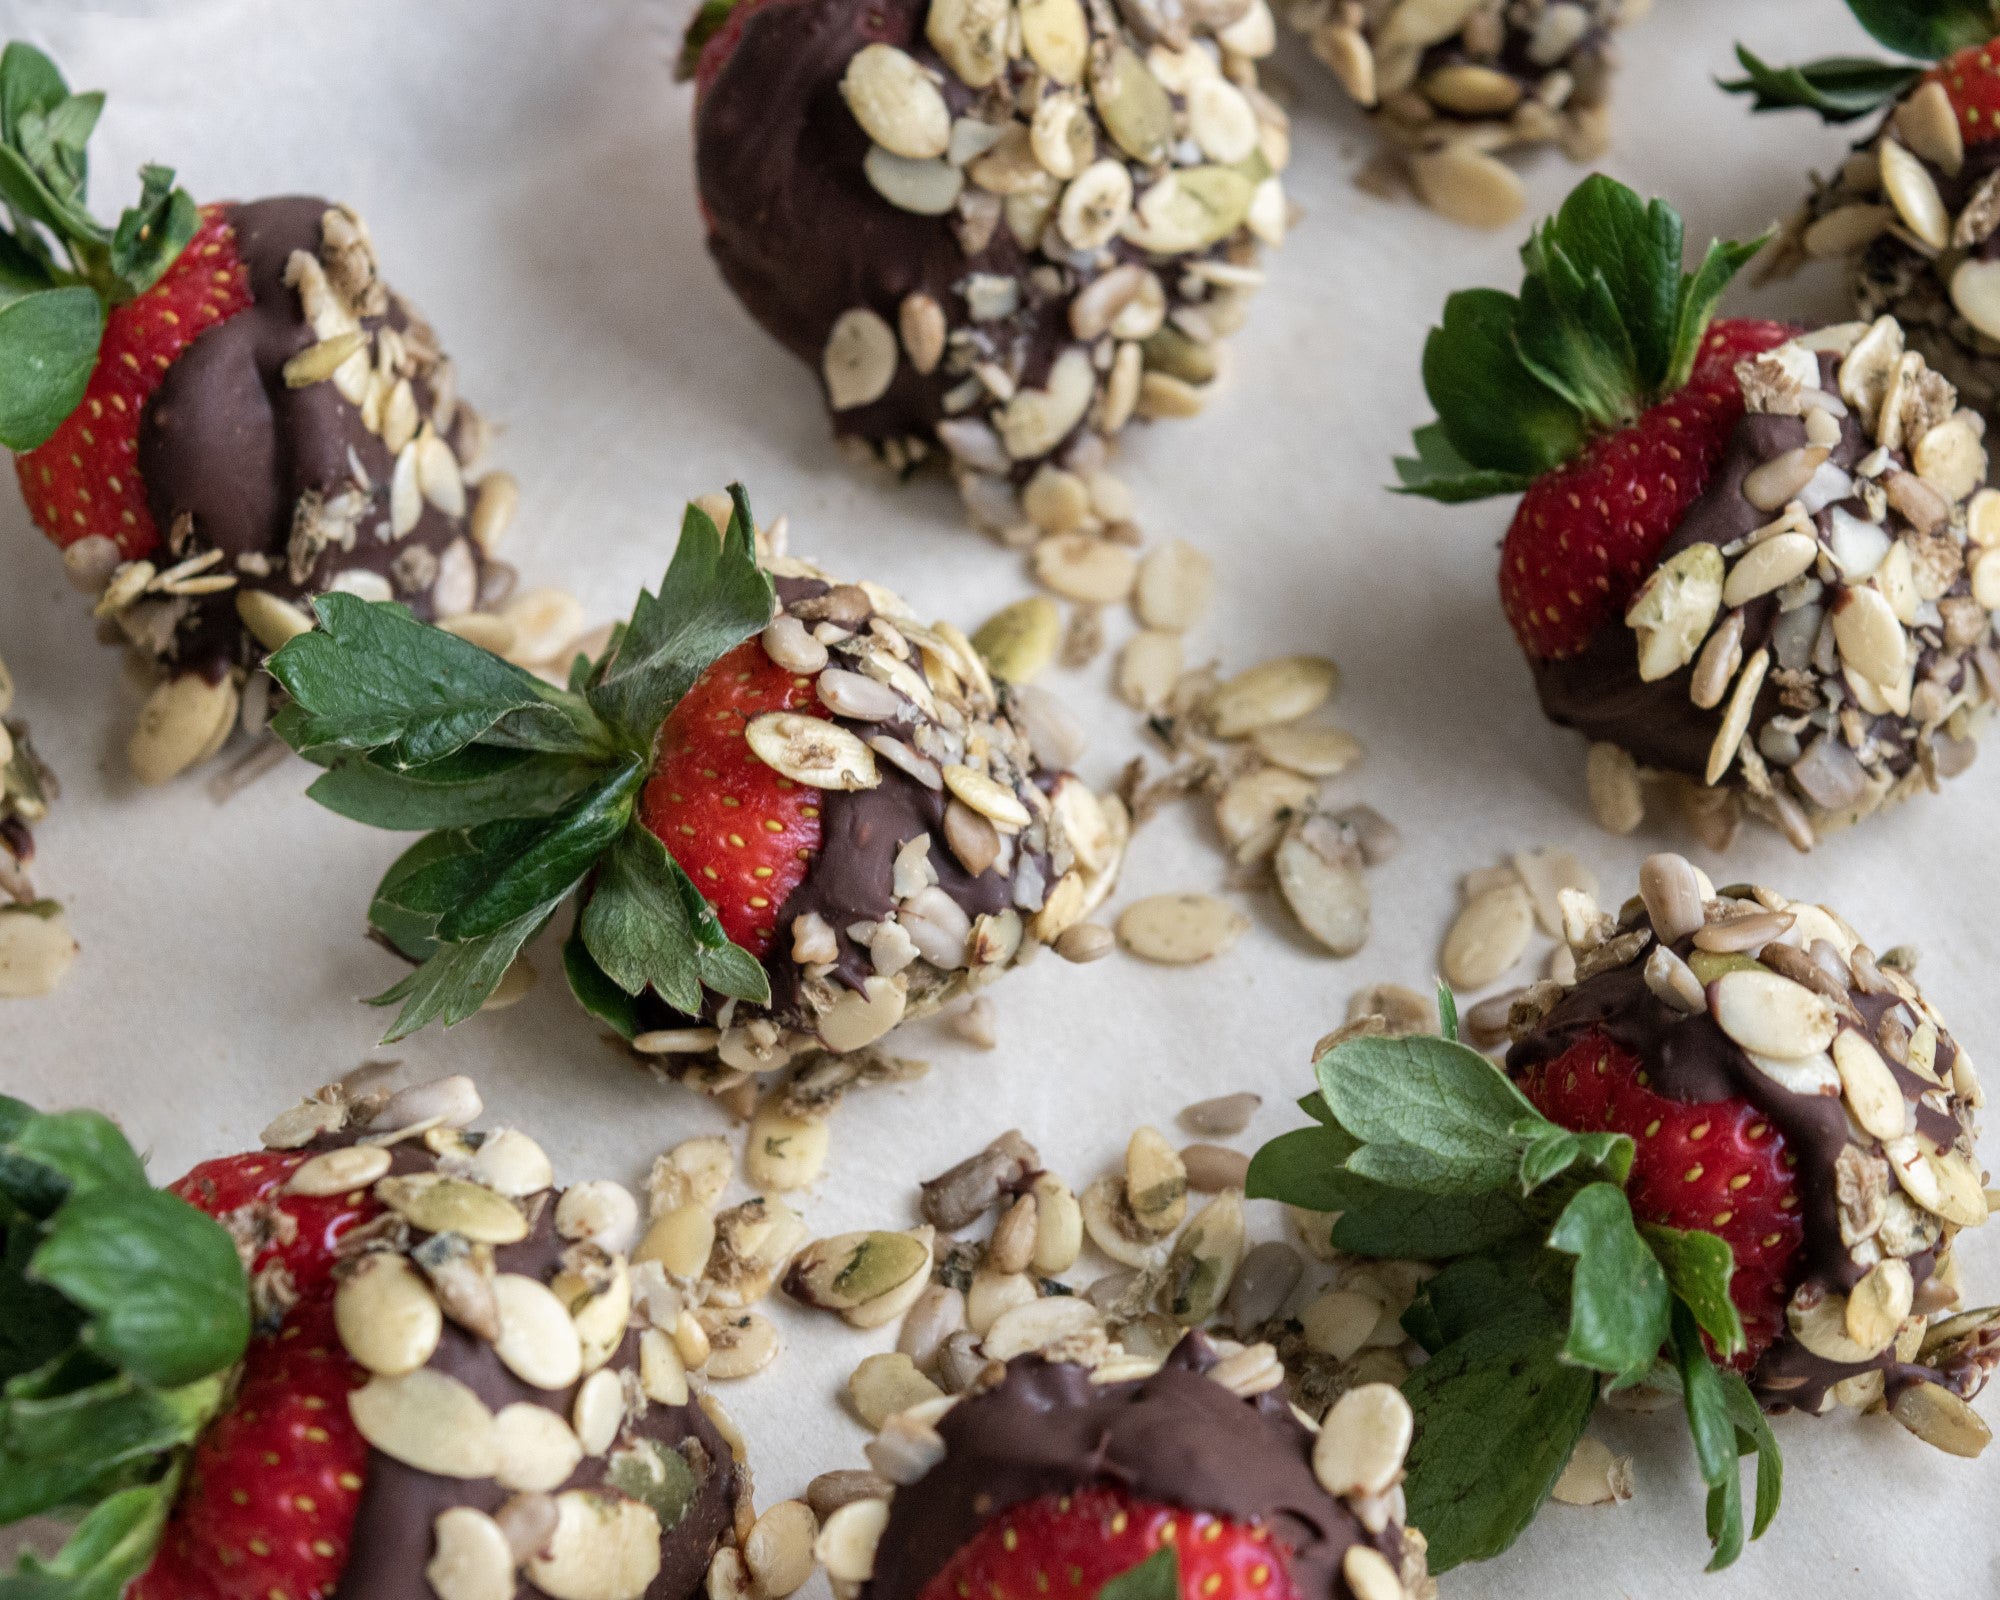 Chocolate and Seed Covered Strawberries